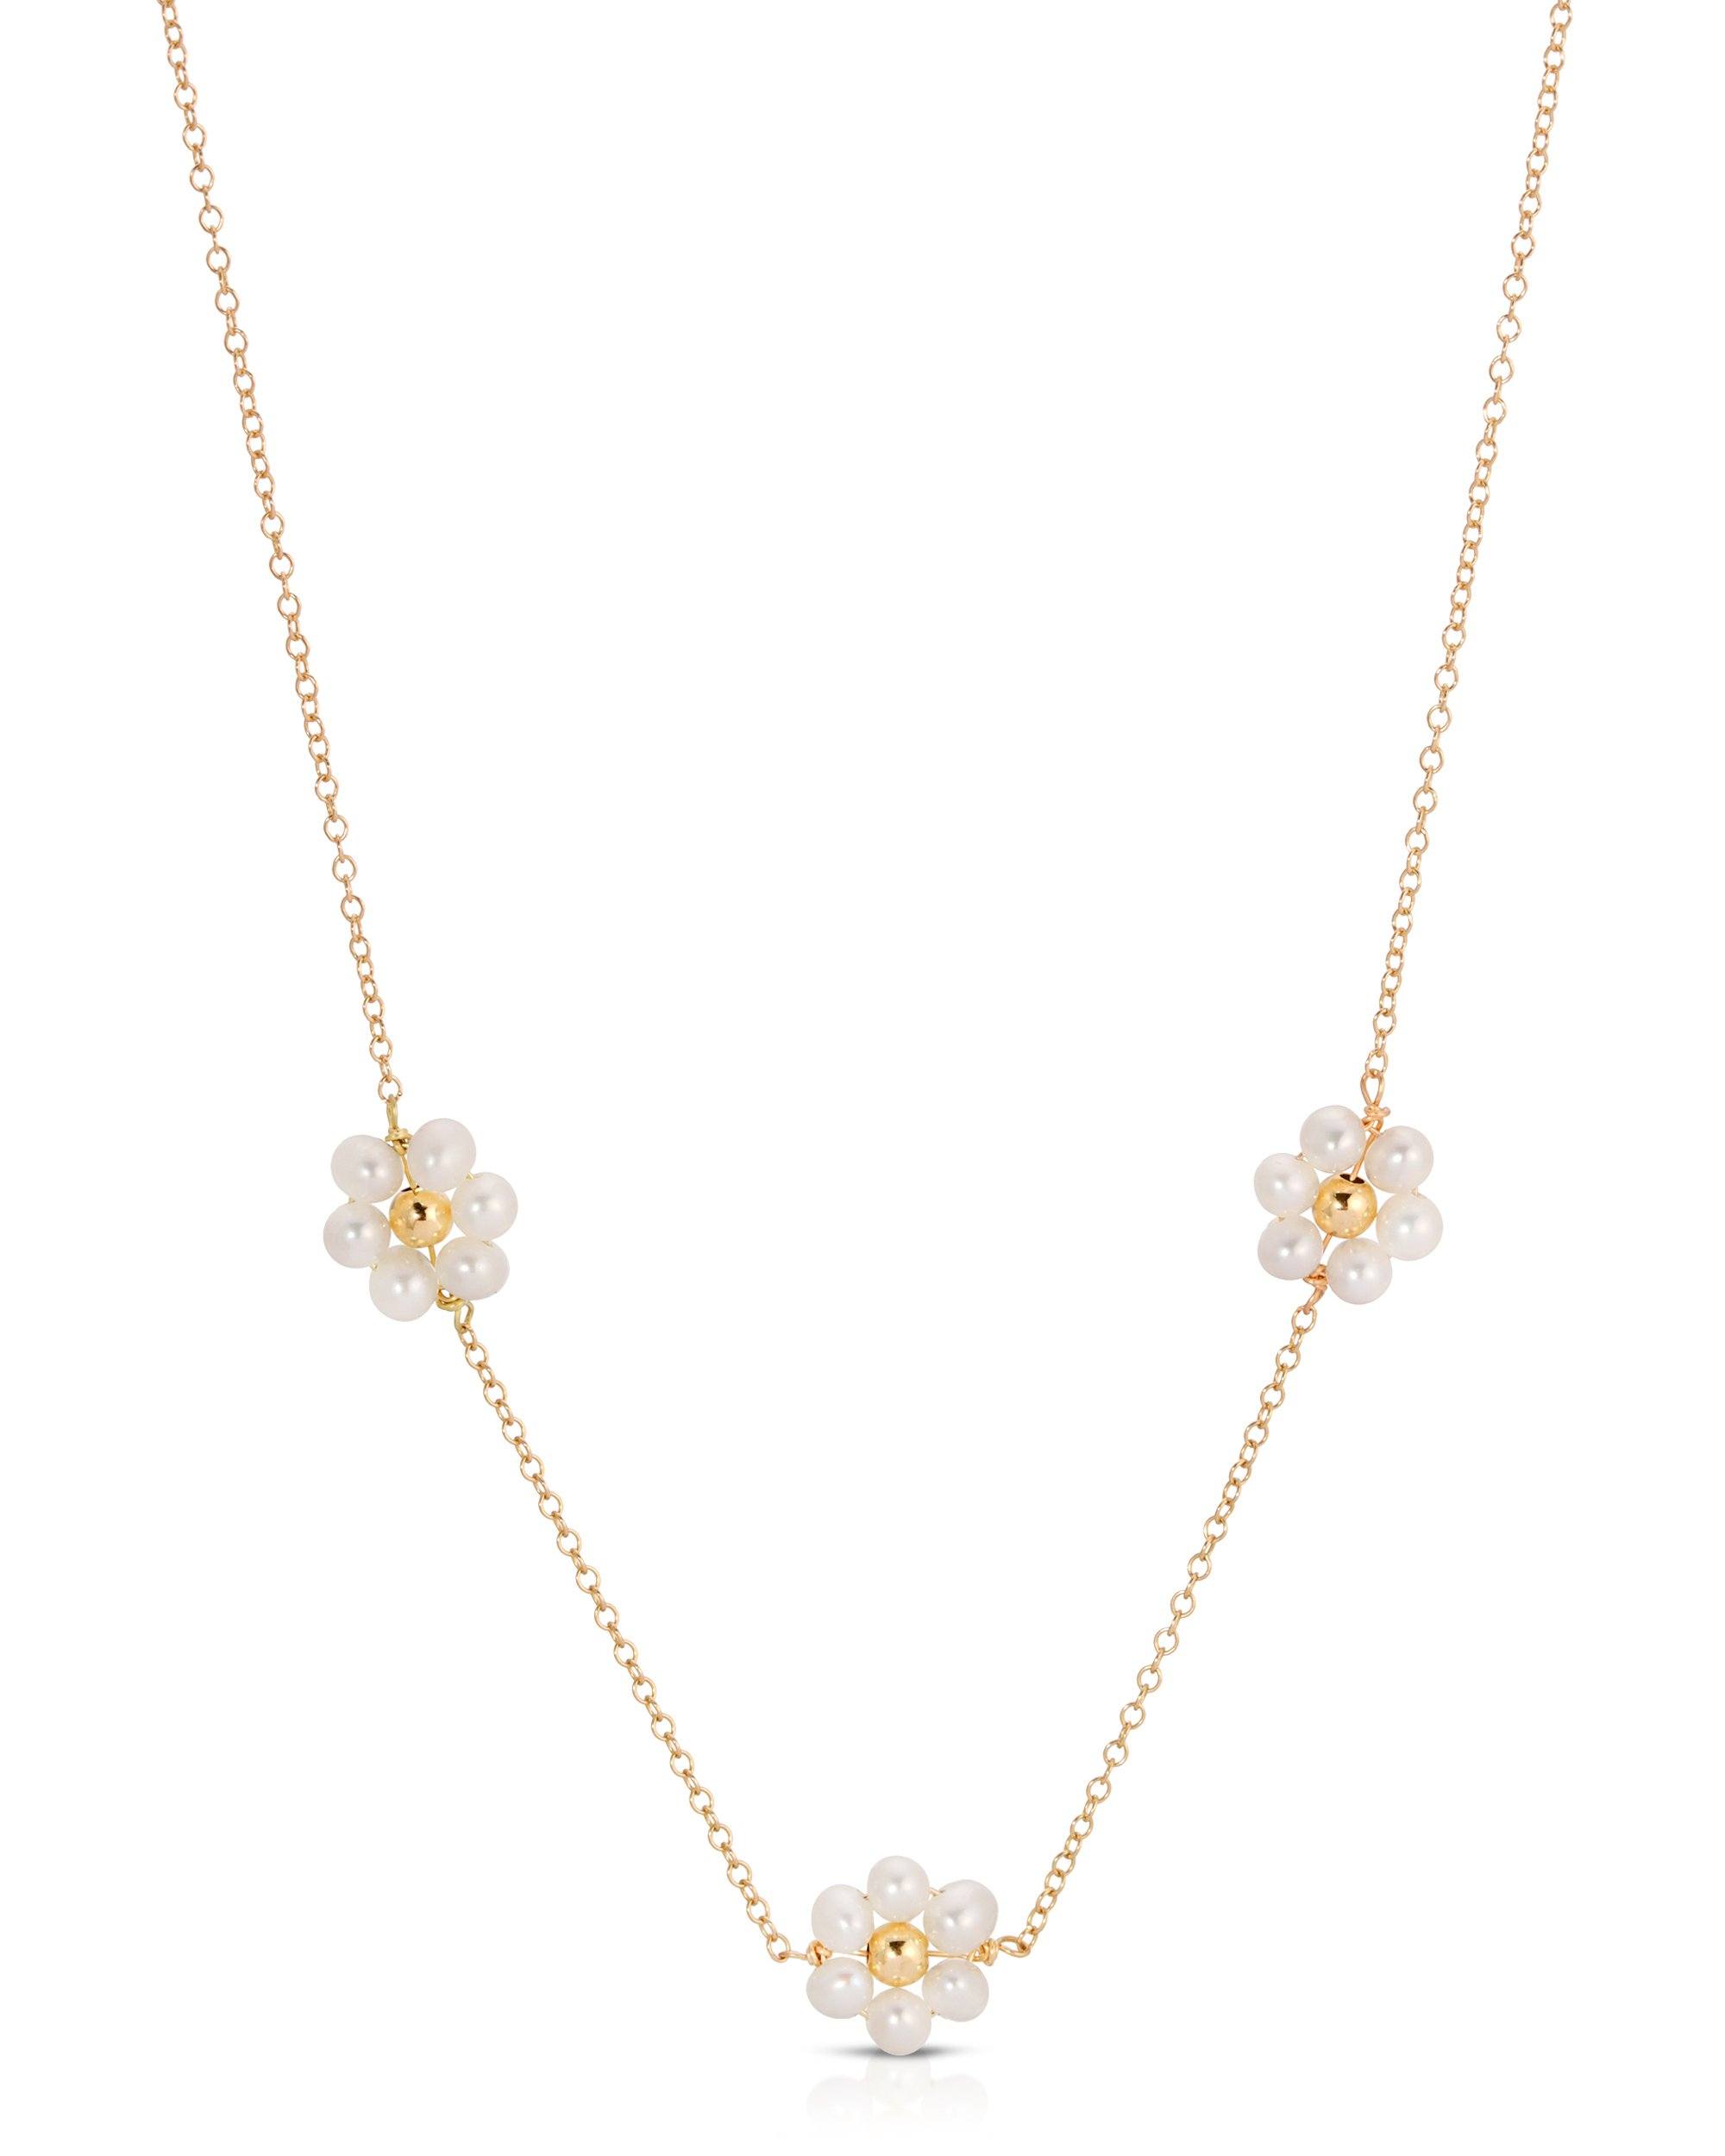 Fiores Choker Necklace by KOZAKH. A 13.5 to 15.5 inch adjustable length choker necklace, crafted in 14K Gold Filled, featuring 3mm Freshwater Pearls in form of daisies.